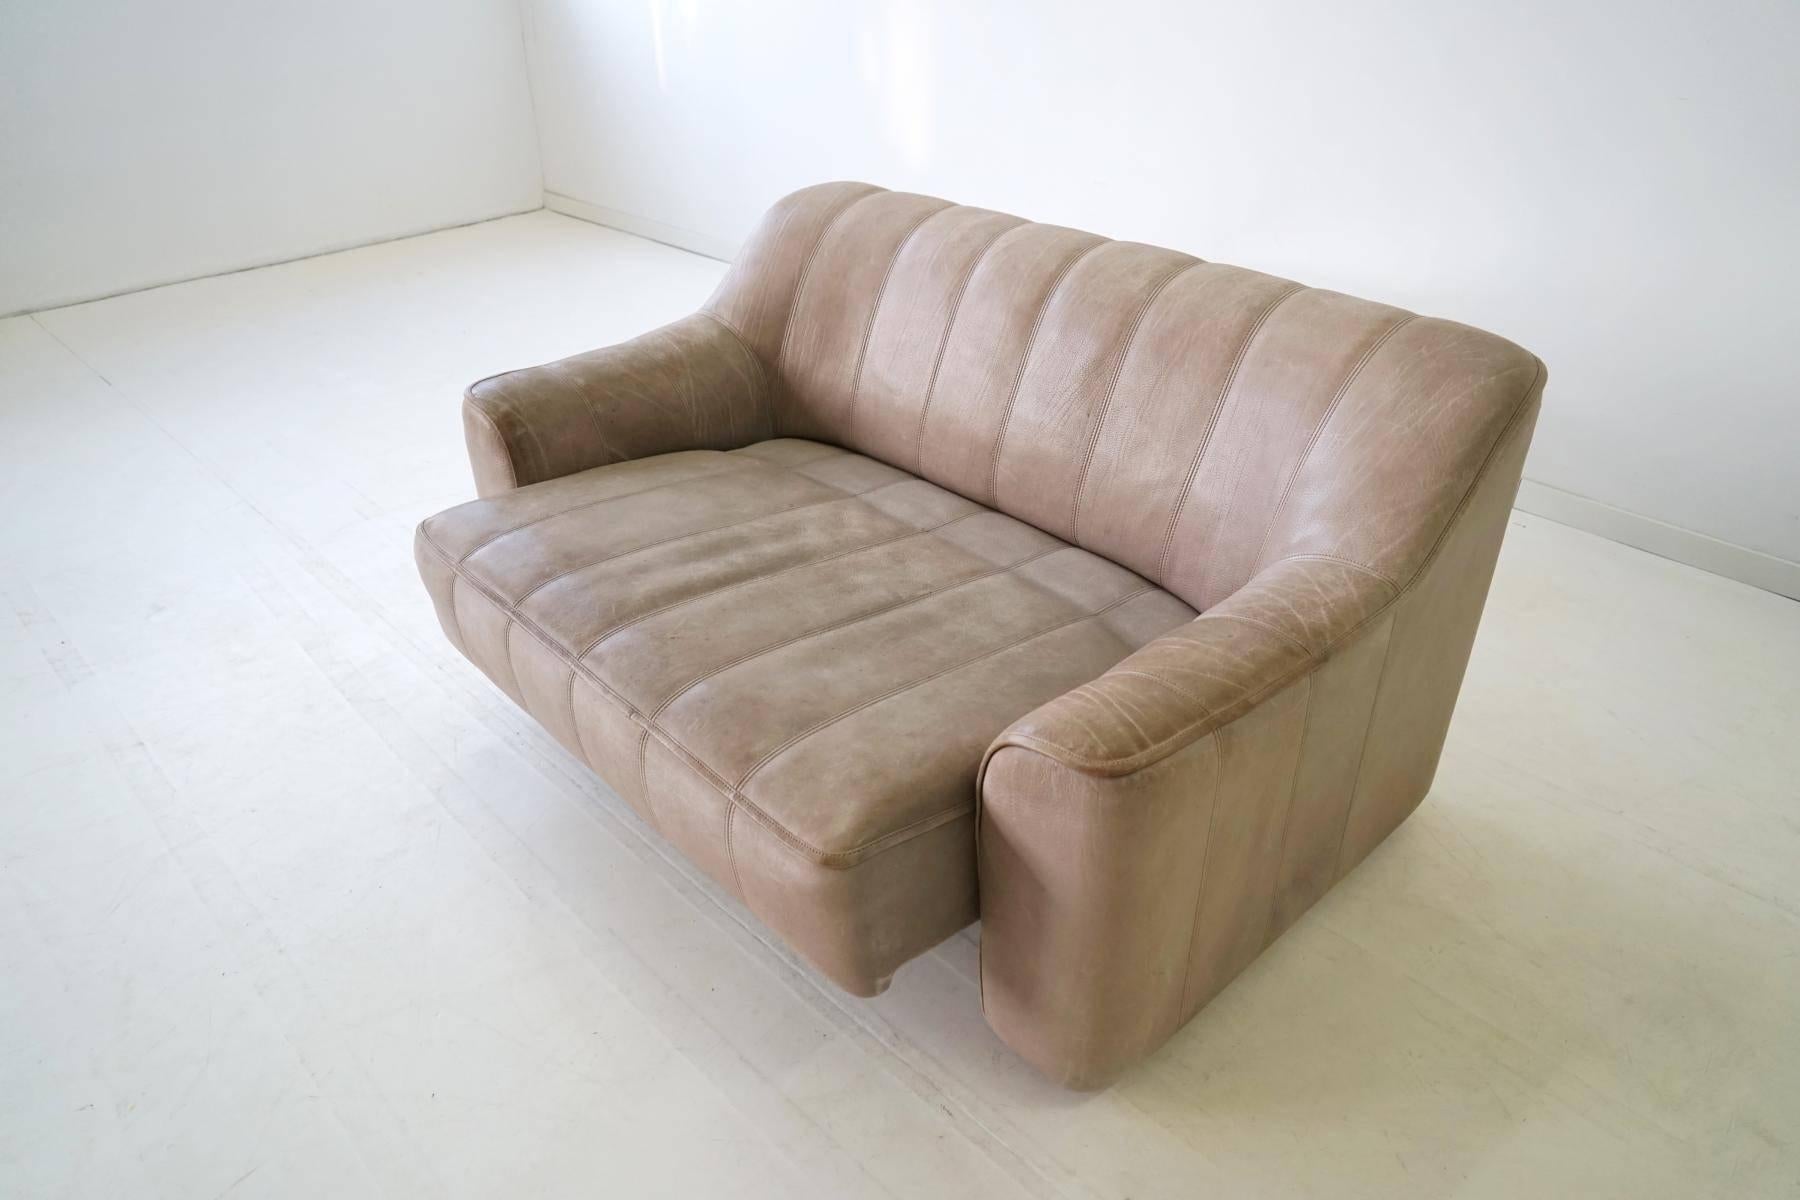 Late 20th Century Two-Seat Ds 44 Sofa by De Sede Neck Leather Extendable Seat